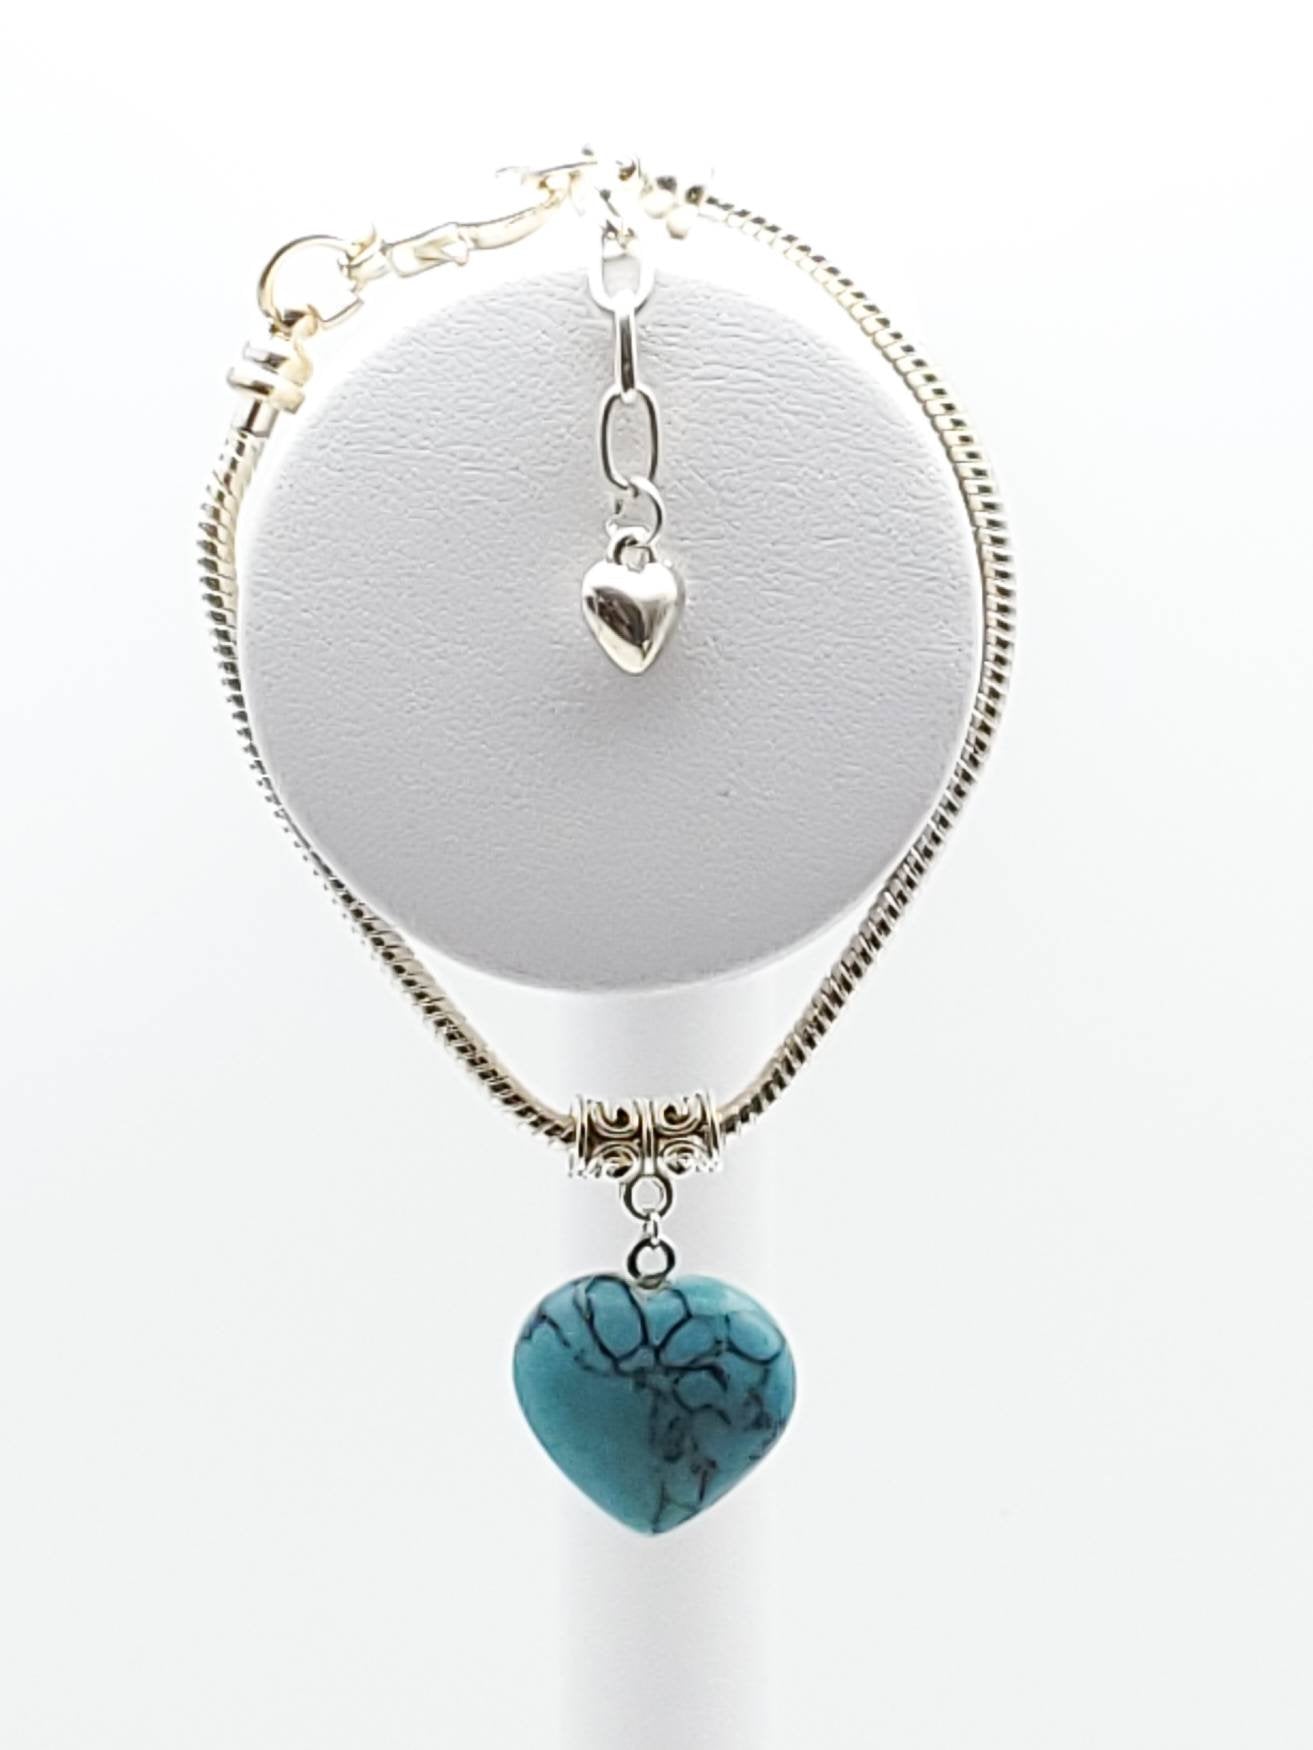 Charm Bracelet with Turquoise Stone Heart - The Caffeinated Raven